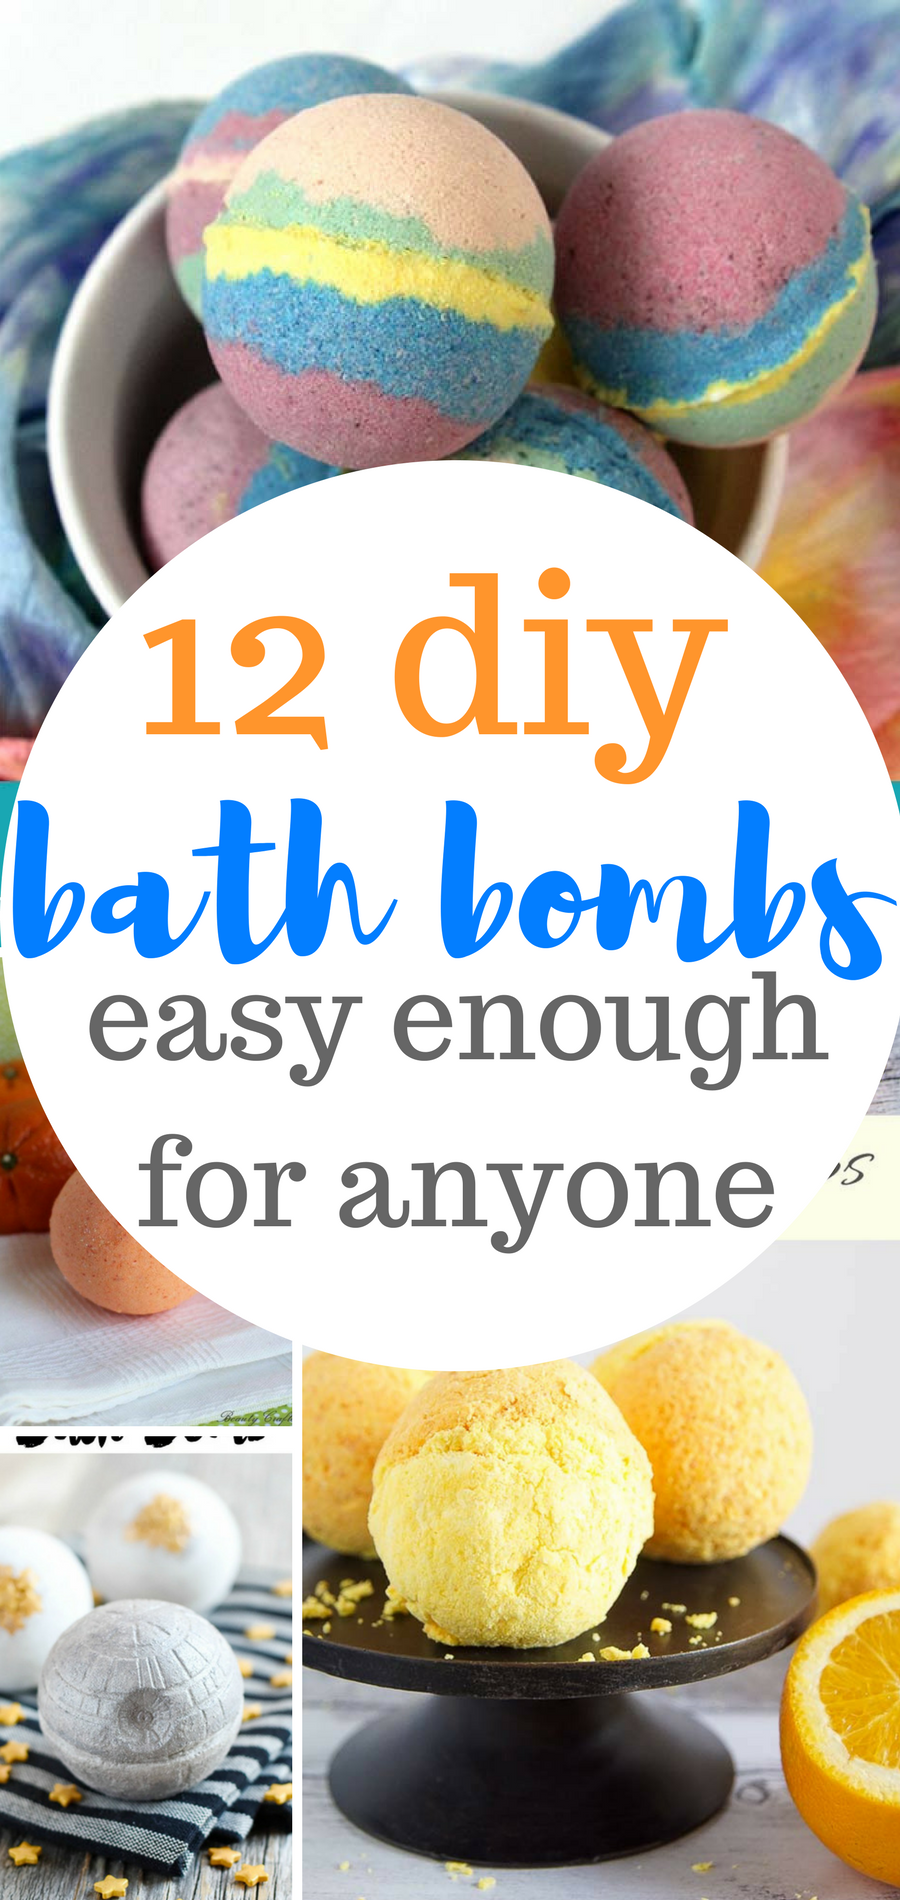 Save yourself a ton of money and make your own bath bombs! Heres how!   Bath Bombs, DIY Bath Bombs, Bath Bomb Recipes, Natural